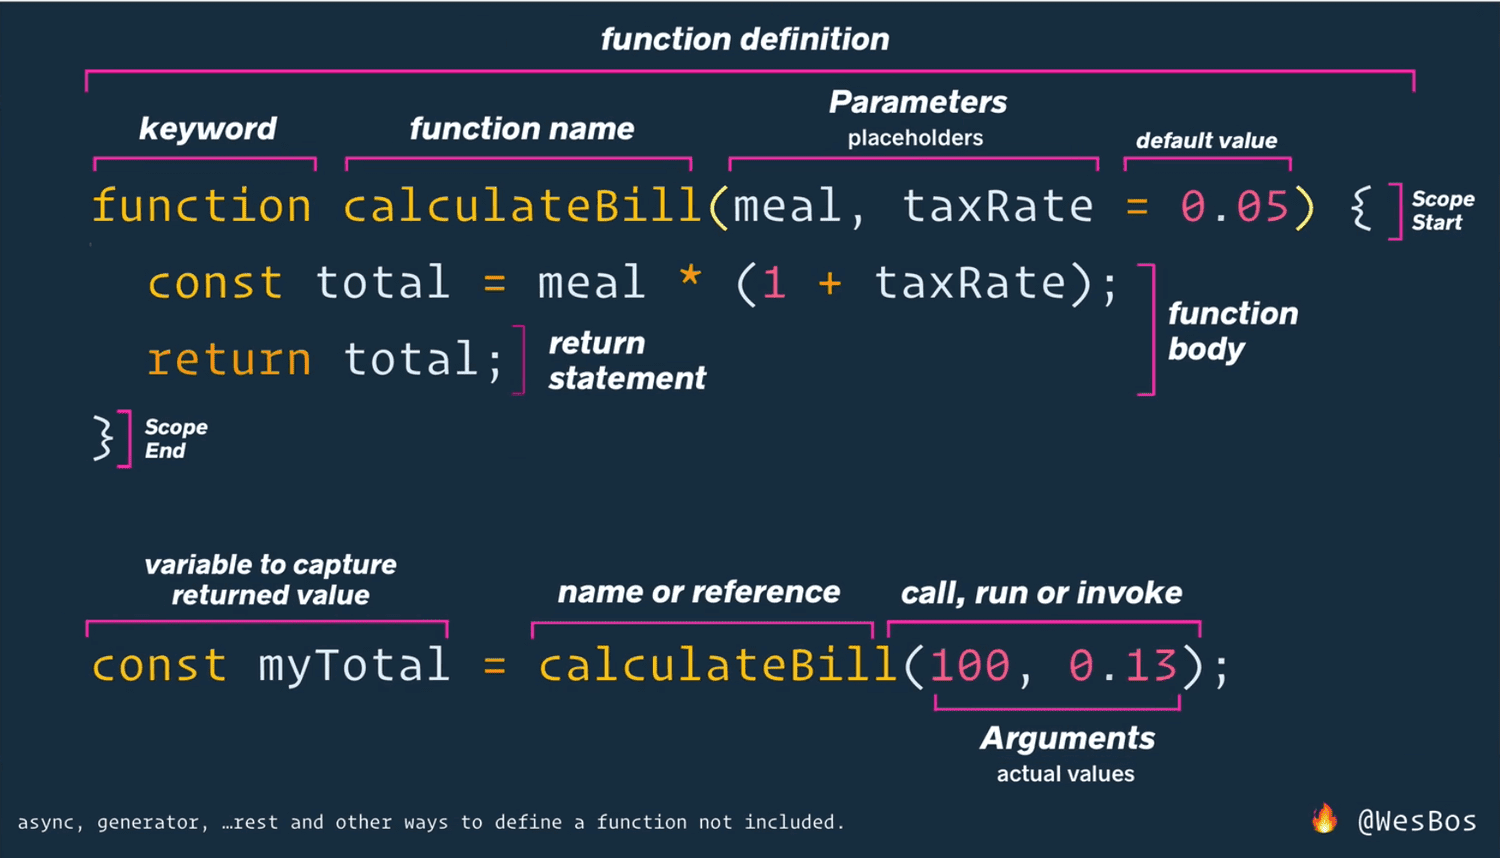 function definition includes function keyword, name, paraeters, default value, body, return value and scoping